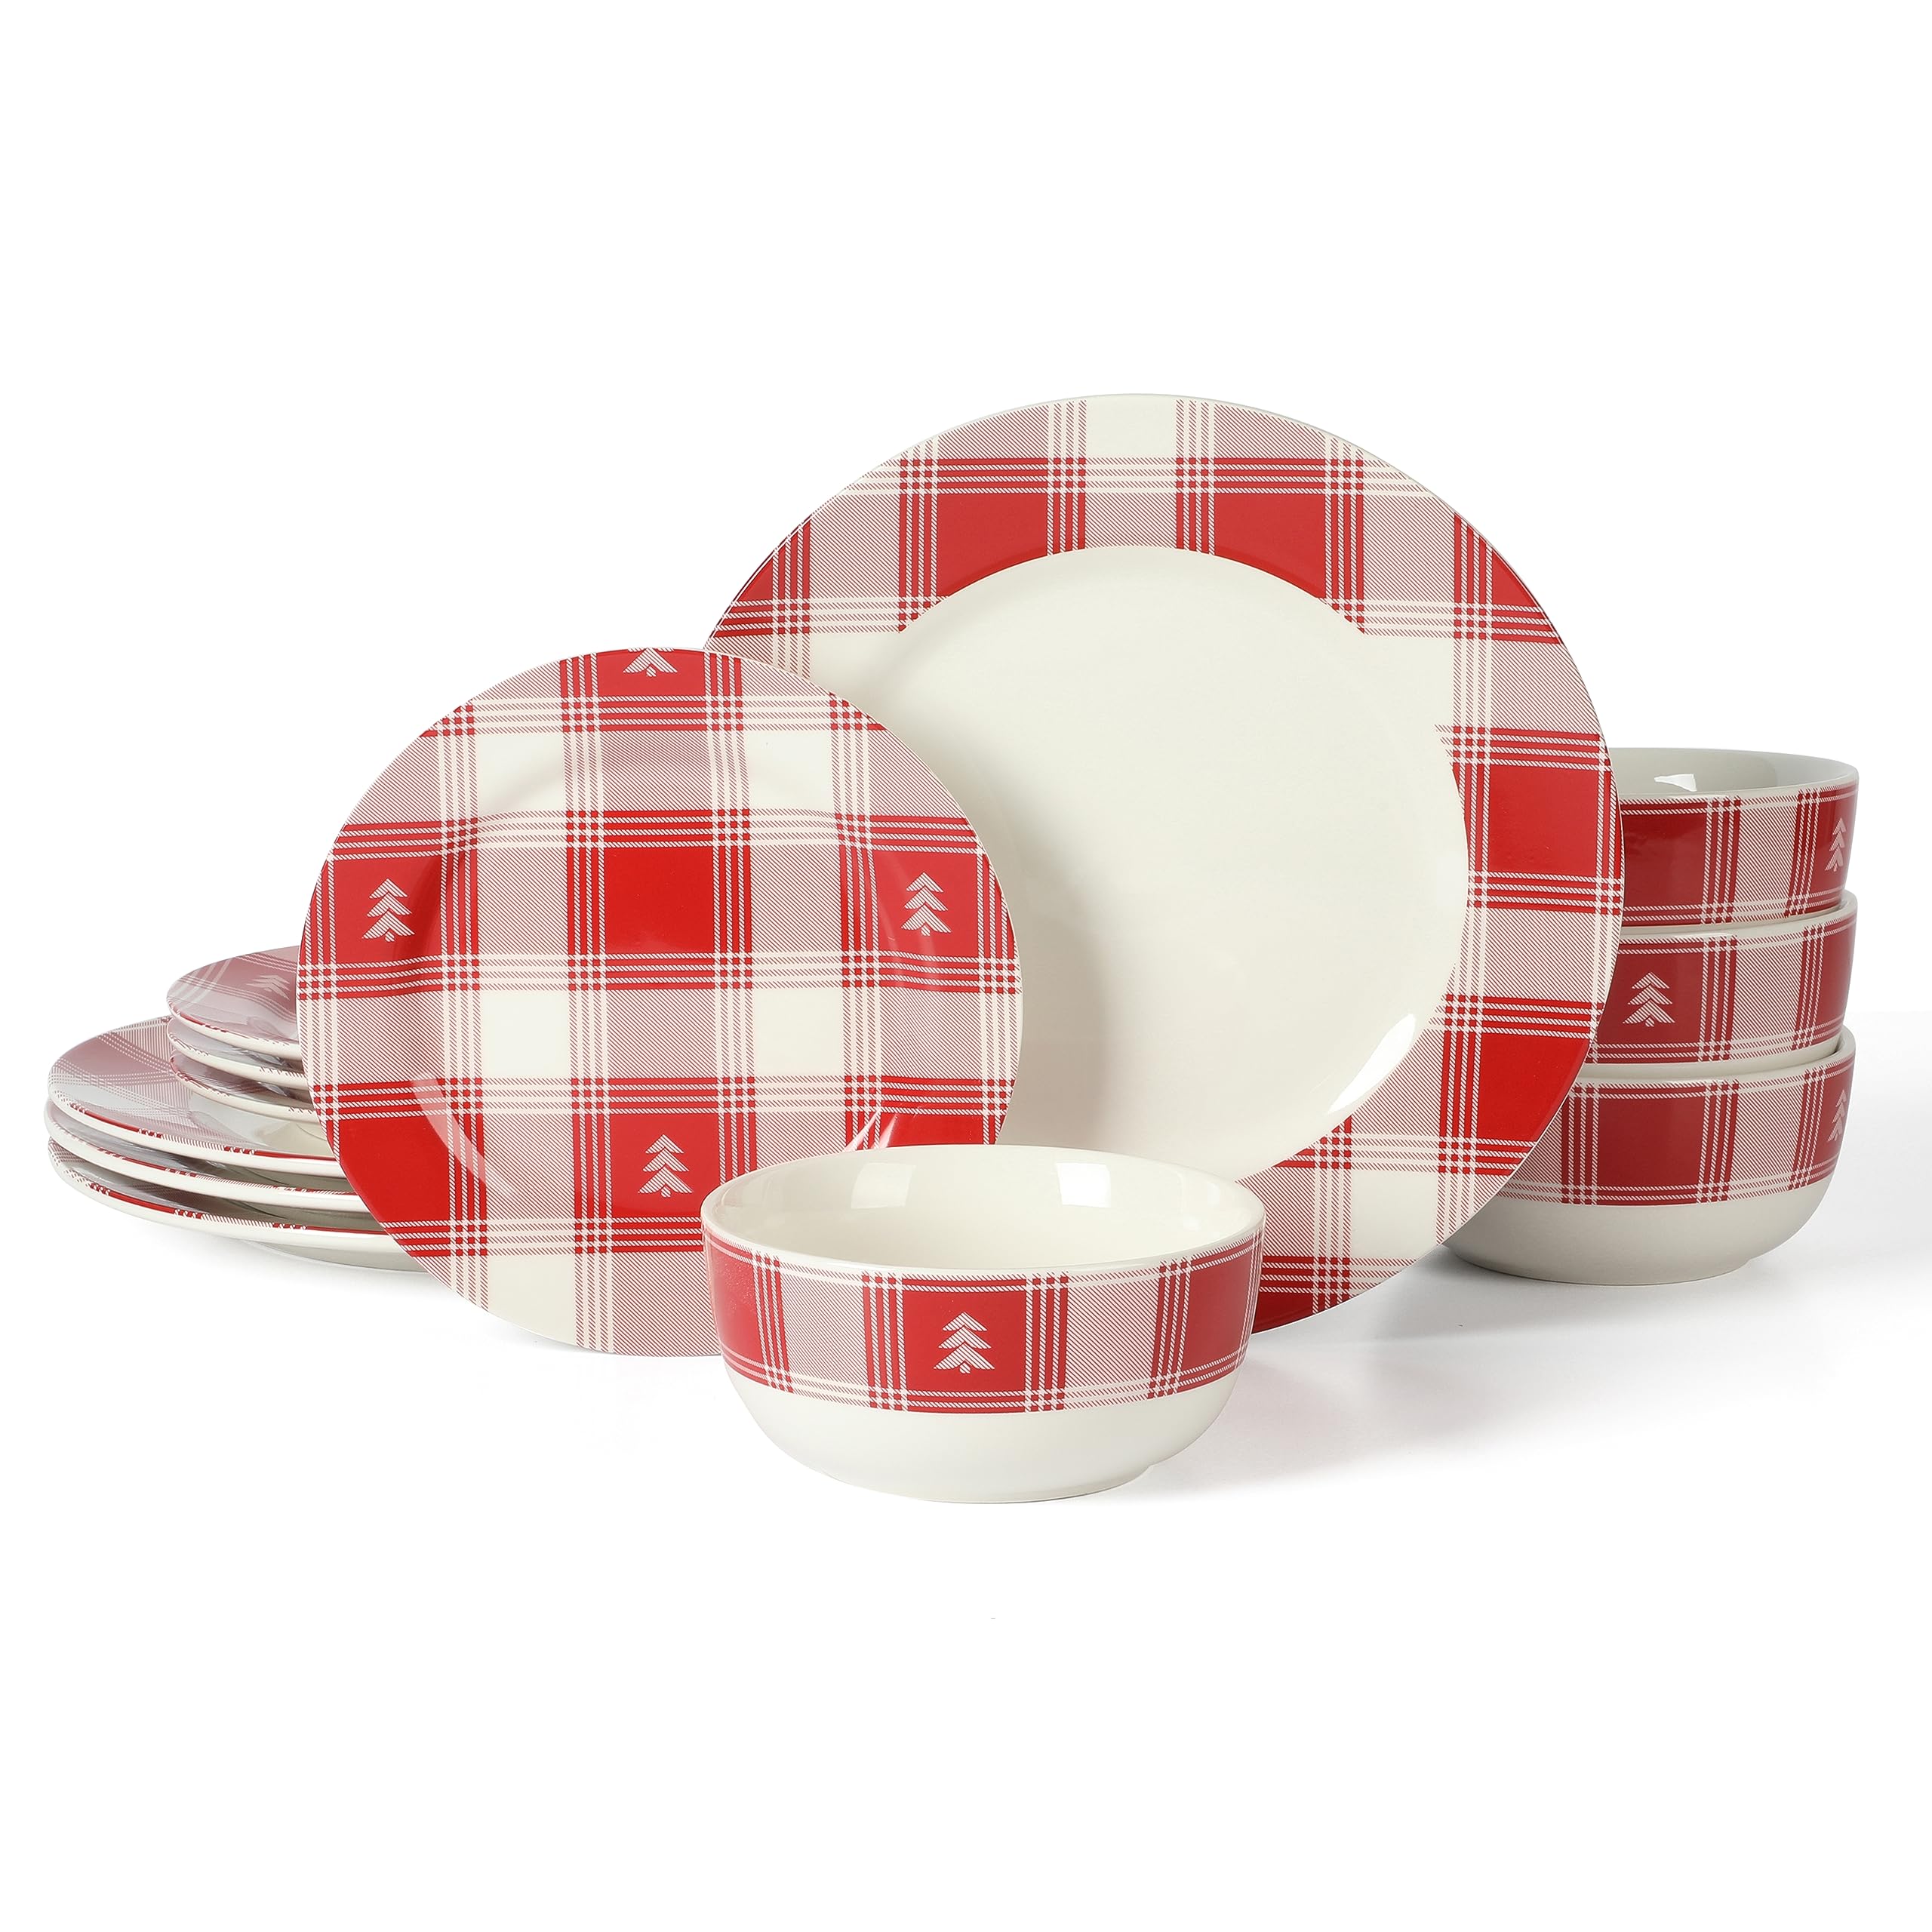 12-Piece Martha Stewart Plaid Decorated Red and White Stoneware Dinnerware Set $28.98 + Free Shipping w/ Prime or on $35+